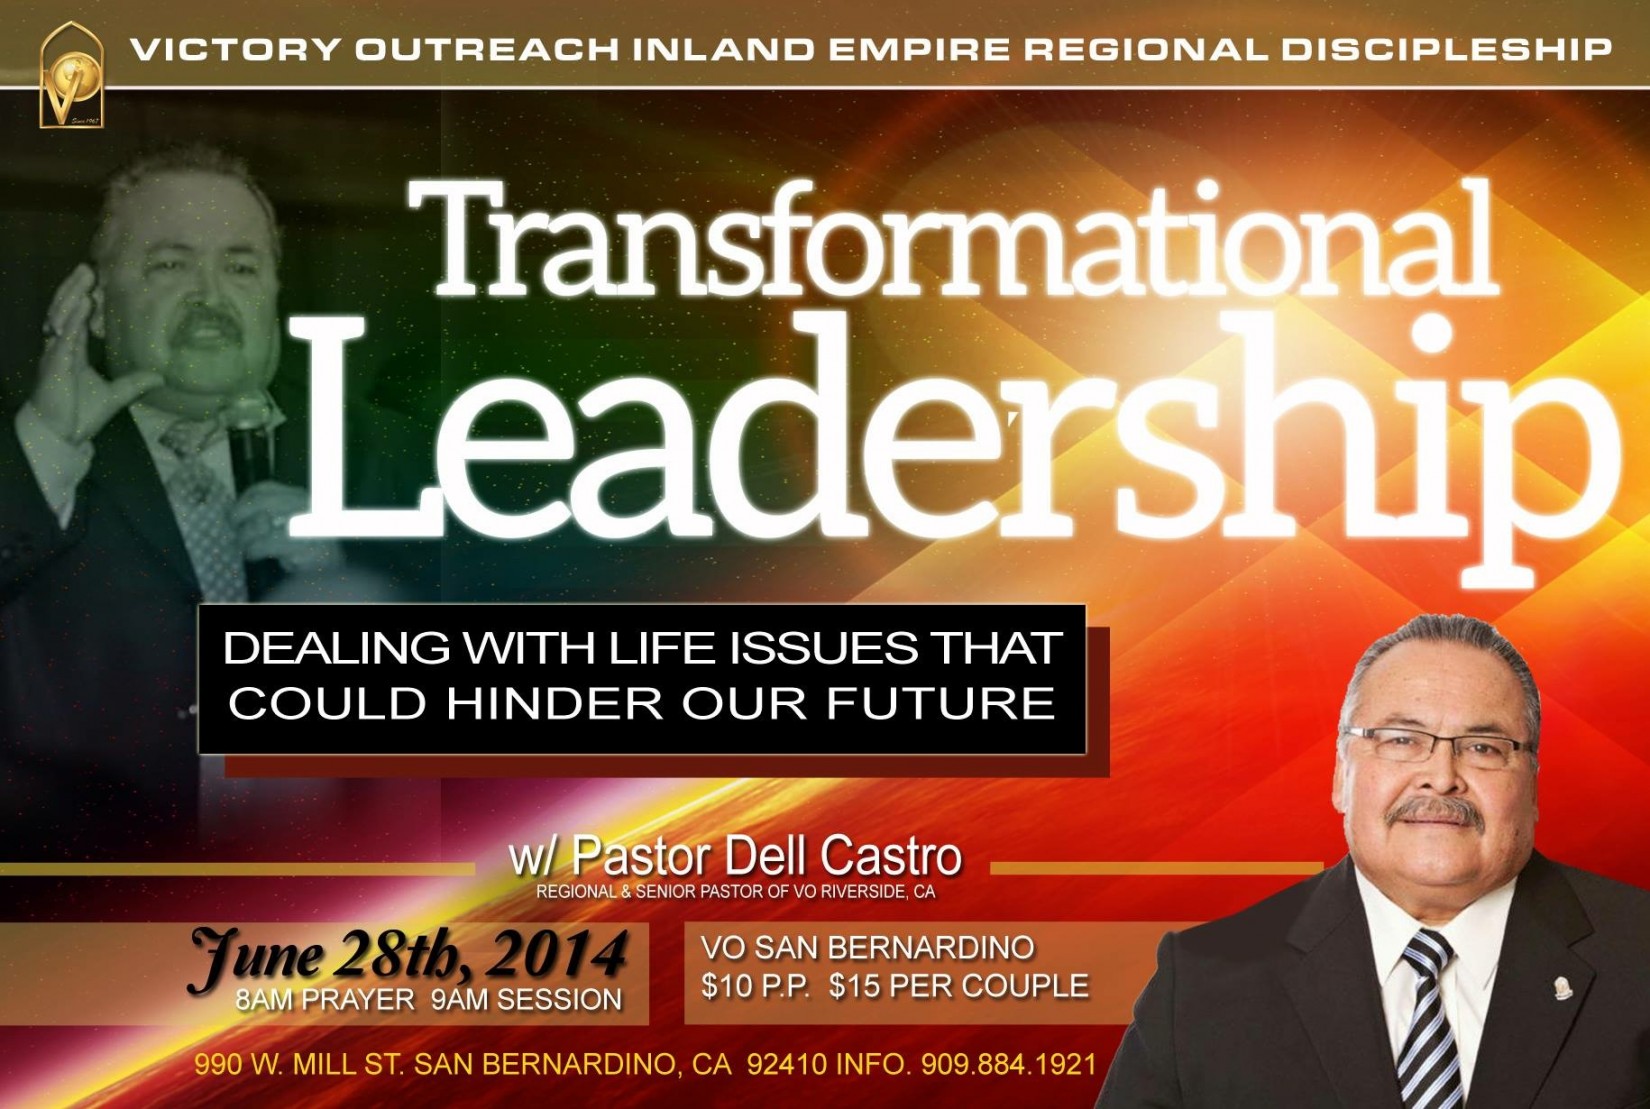 What font is used on "victory outreach inland.." at the top?